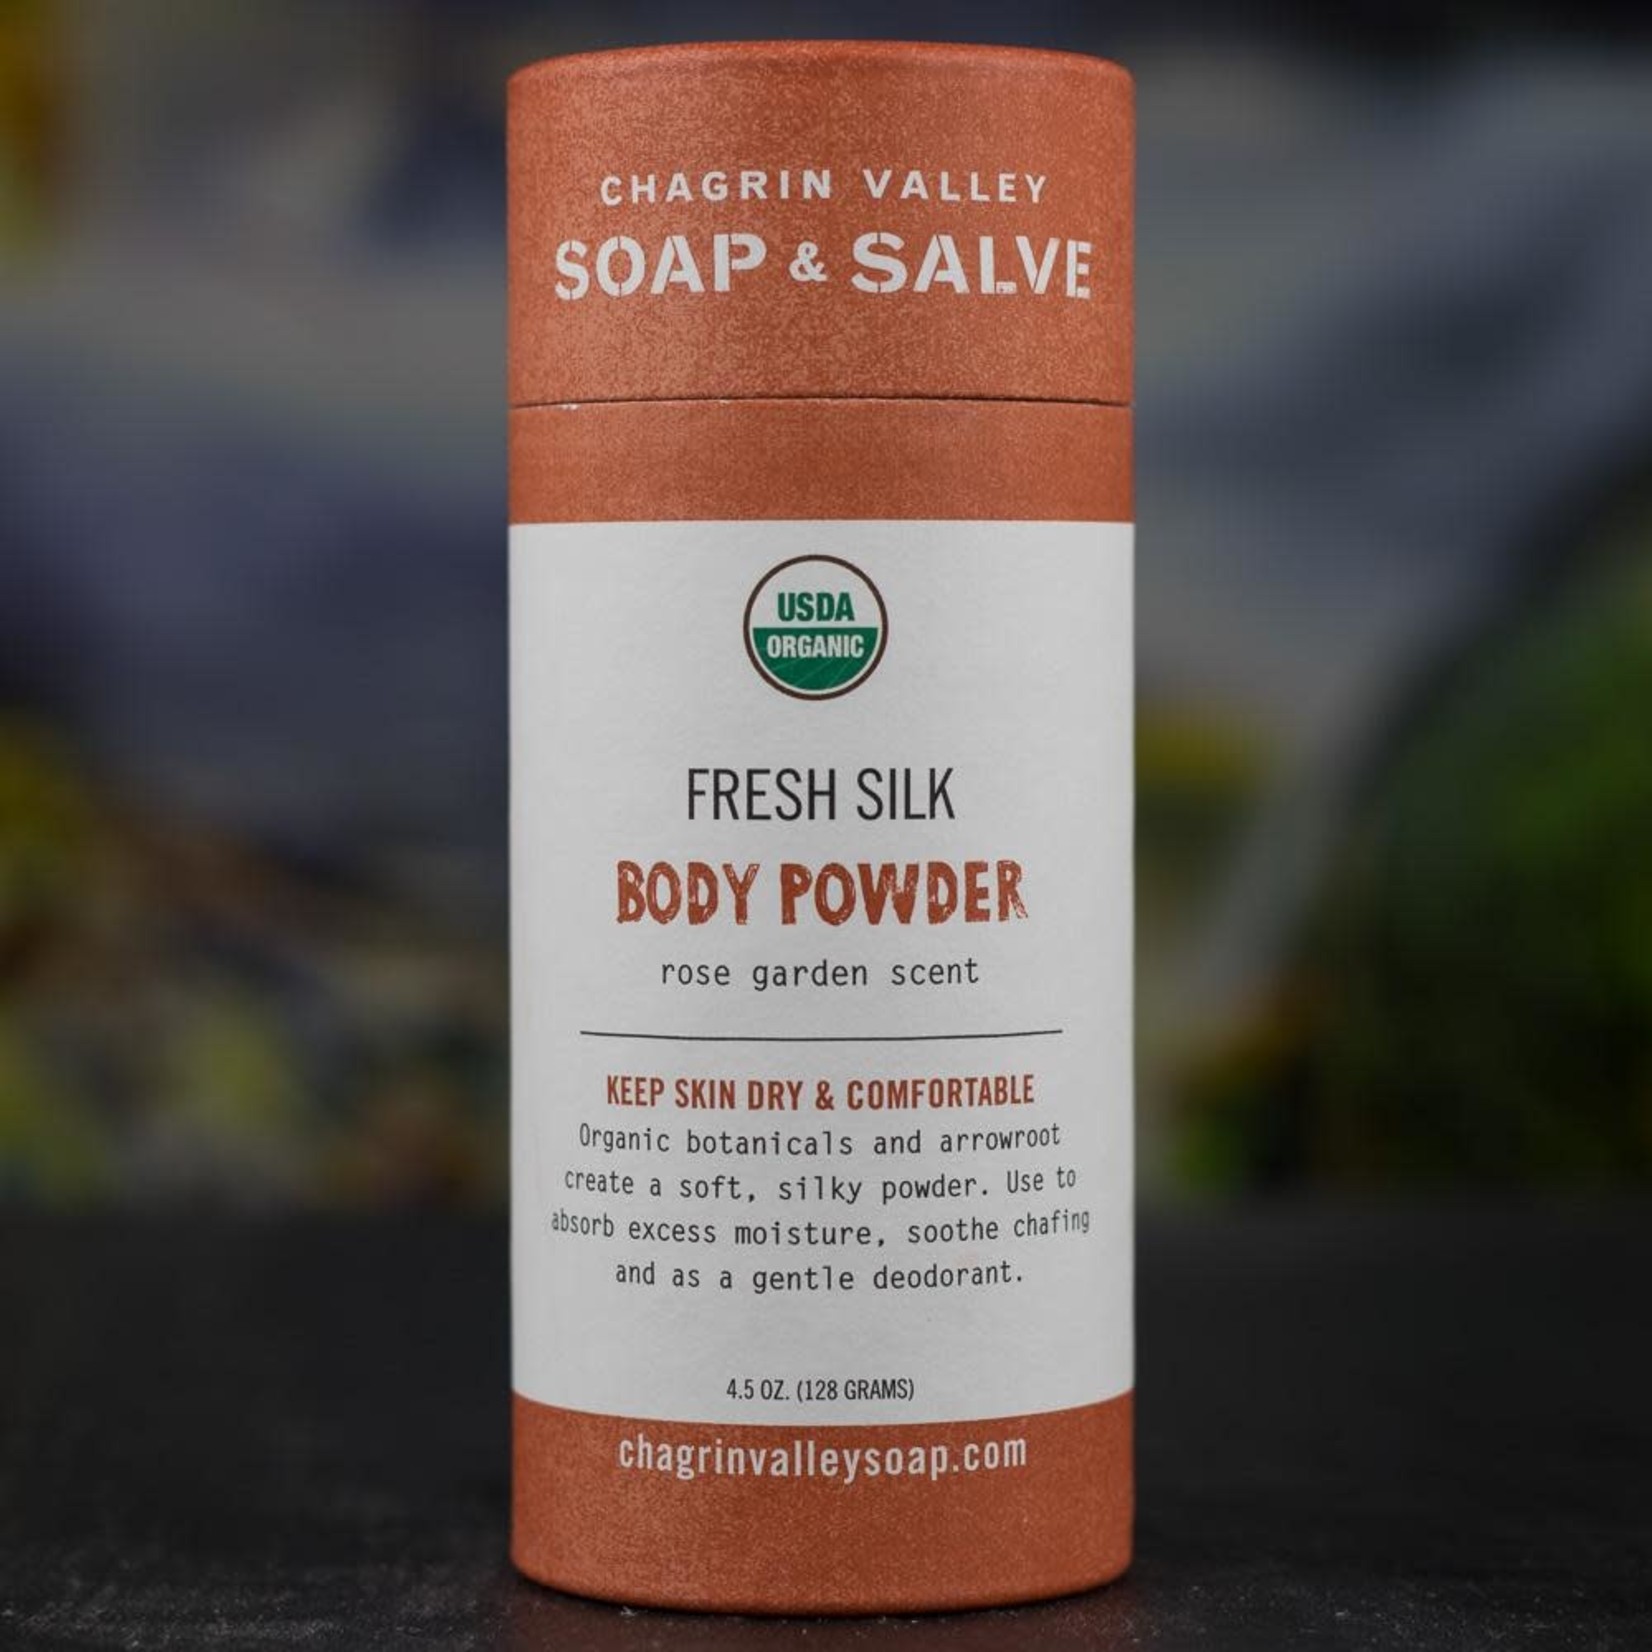 Chagrin Valley Soap and Salve Body Powder